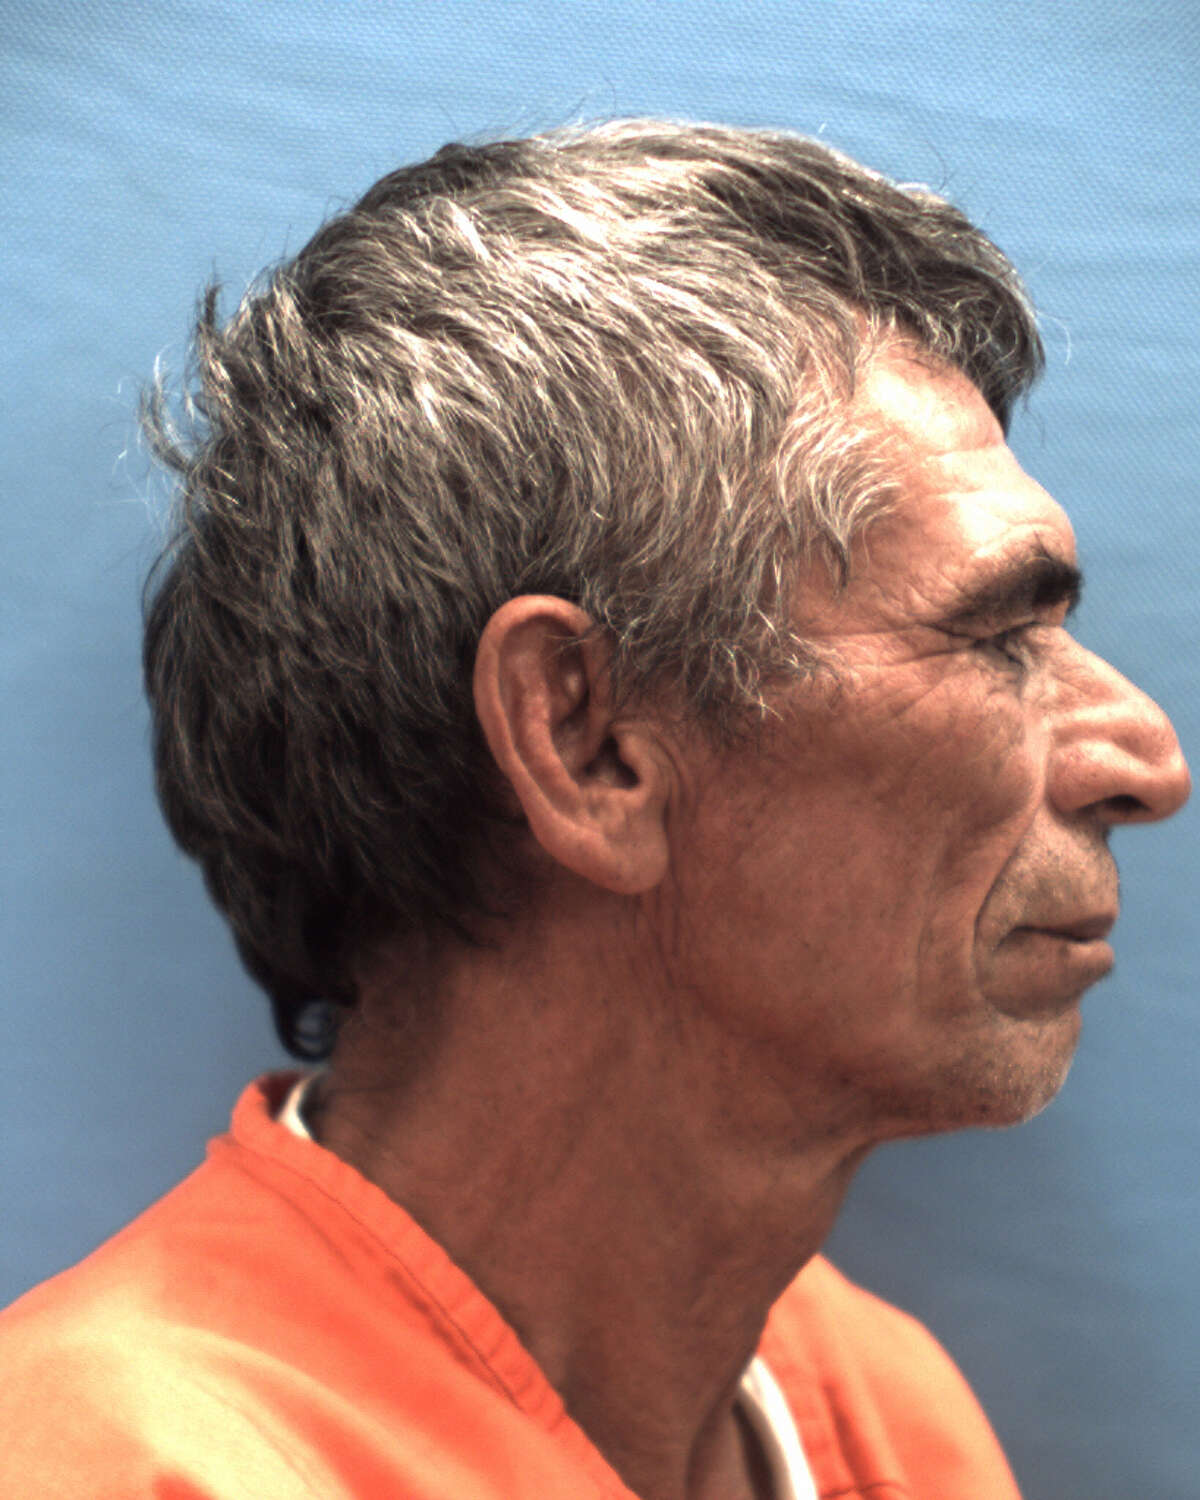 A 61-year-old San Marcos man pleaded guilty Monday to engaging in prohibited sexual conduct with his niece whom he later married. Esteban Chavez Castillo will serve 17 years in prison, the Seguin Gazette reported.